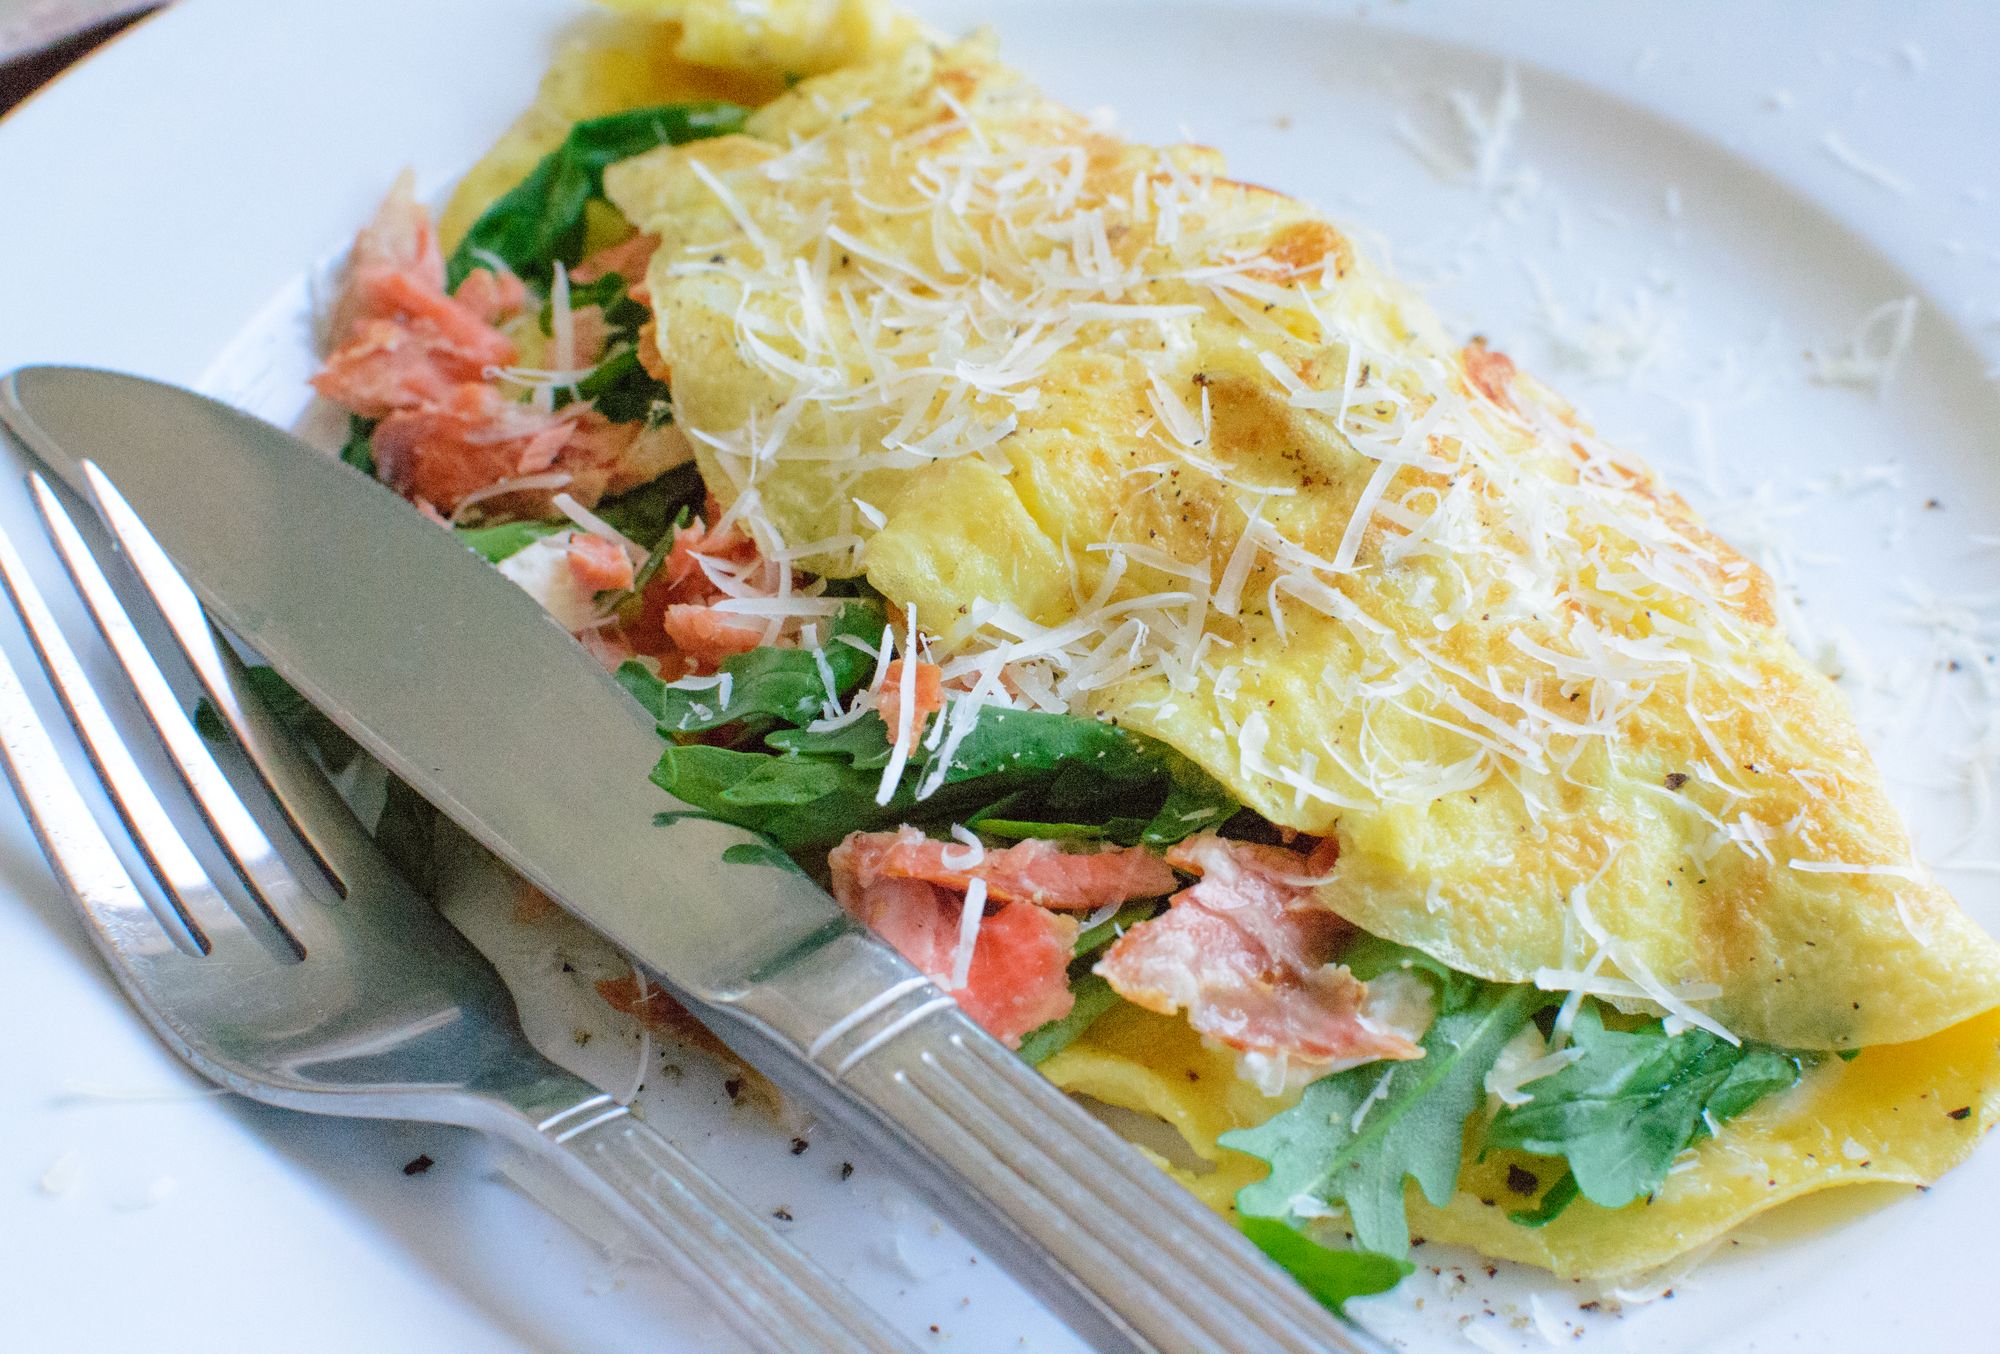 Smoked Salmon and Herbs Omelette